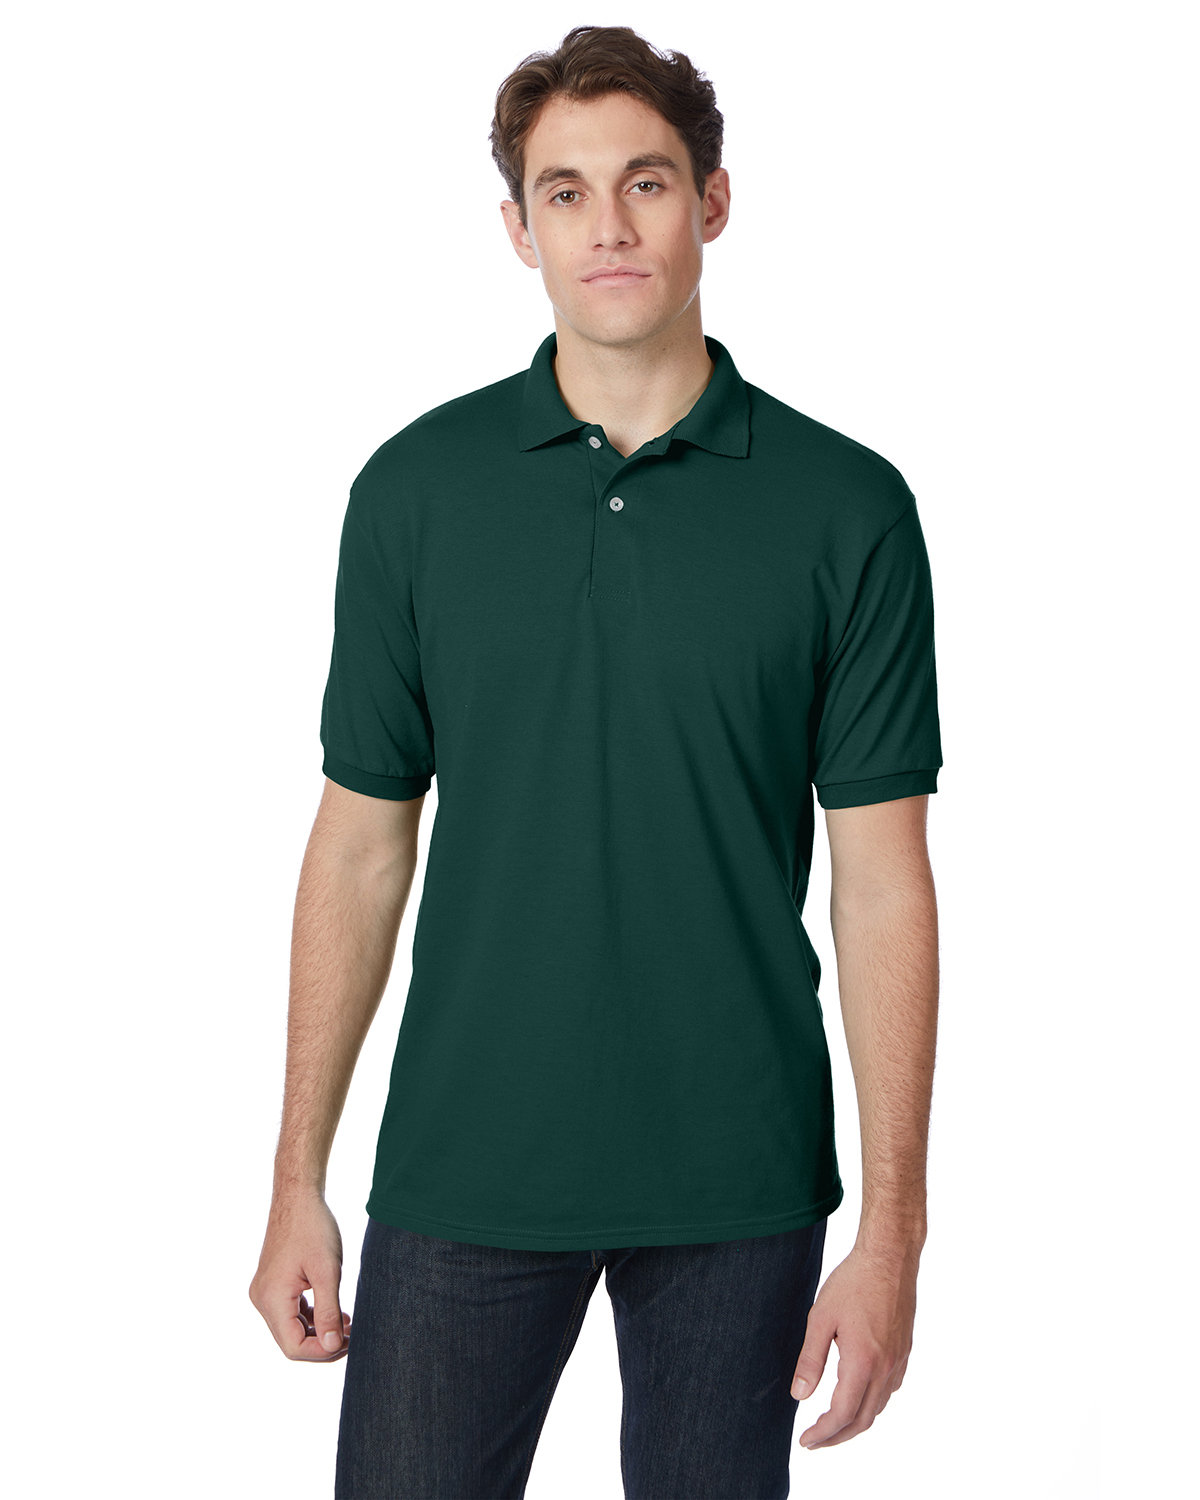 Hanes Adult 50/50 EcoSmart® Jersey Knit Polo DEEP FOREST 